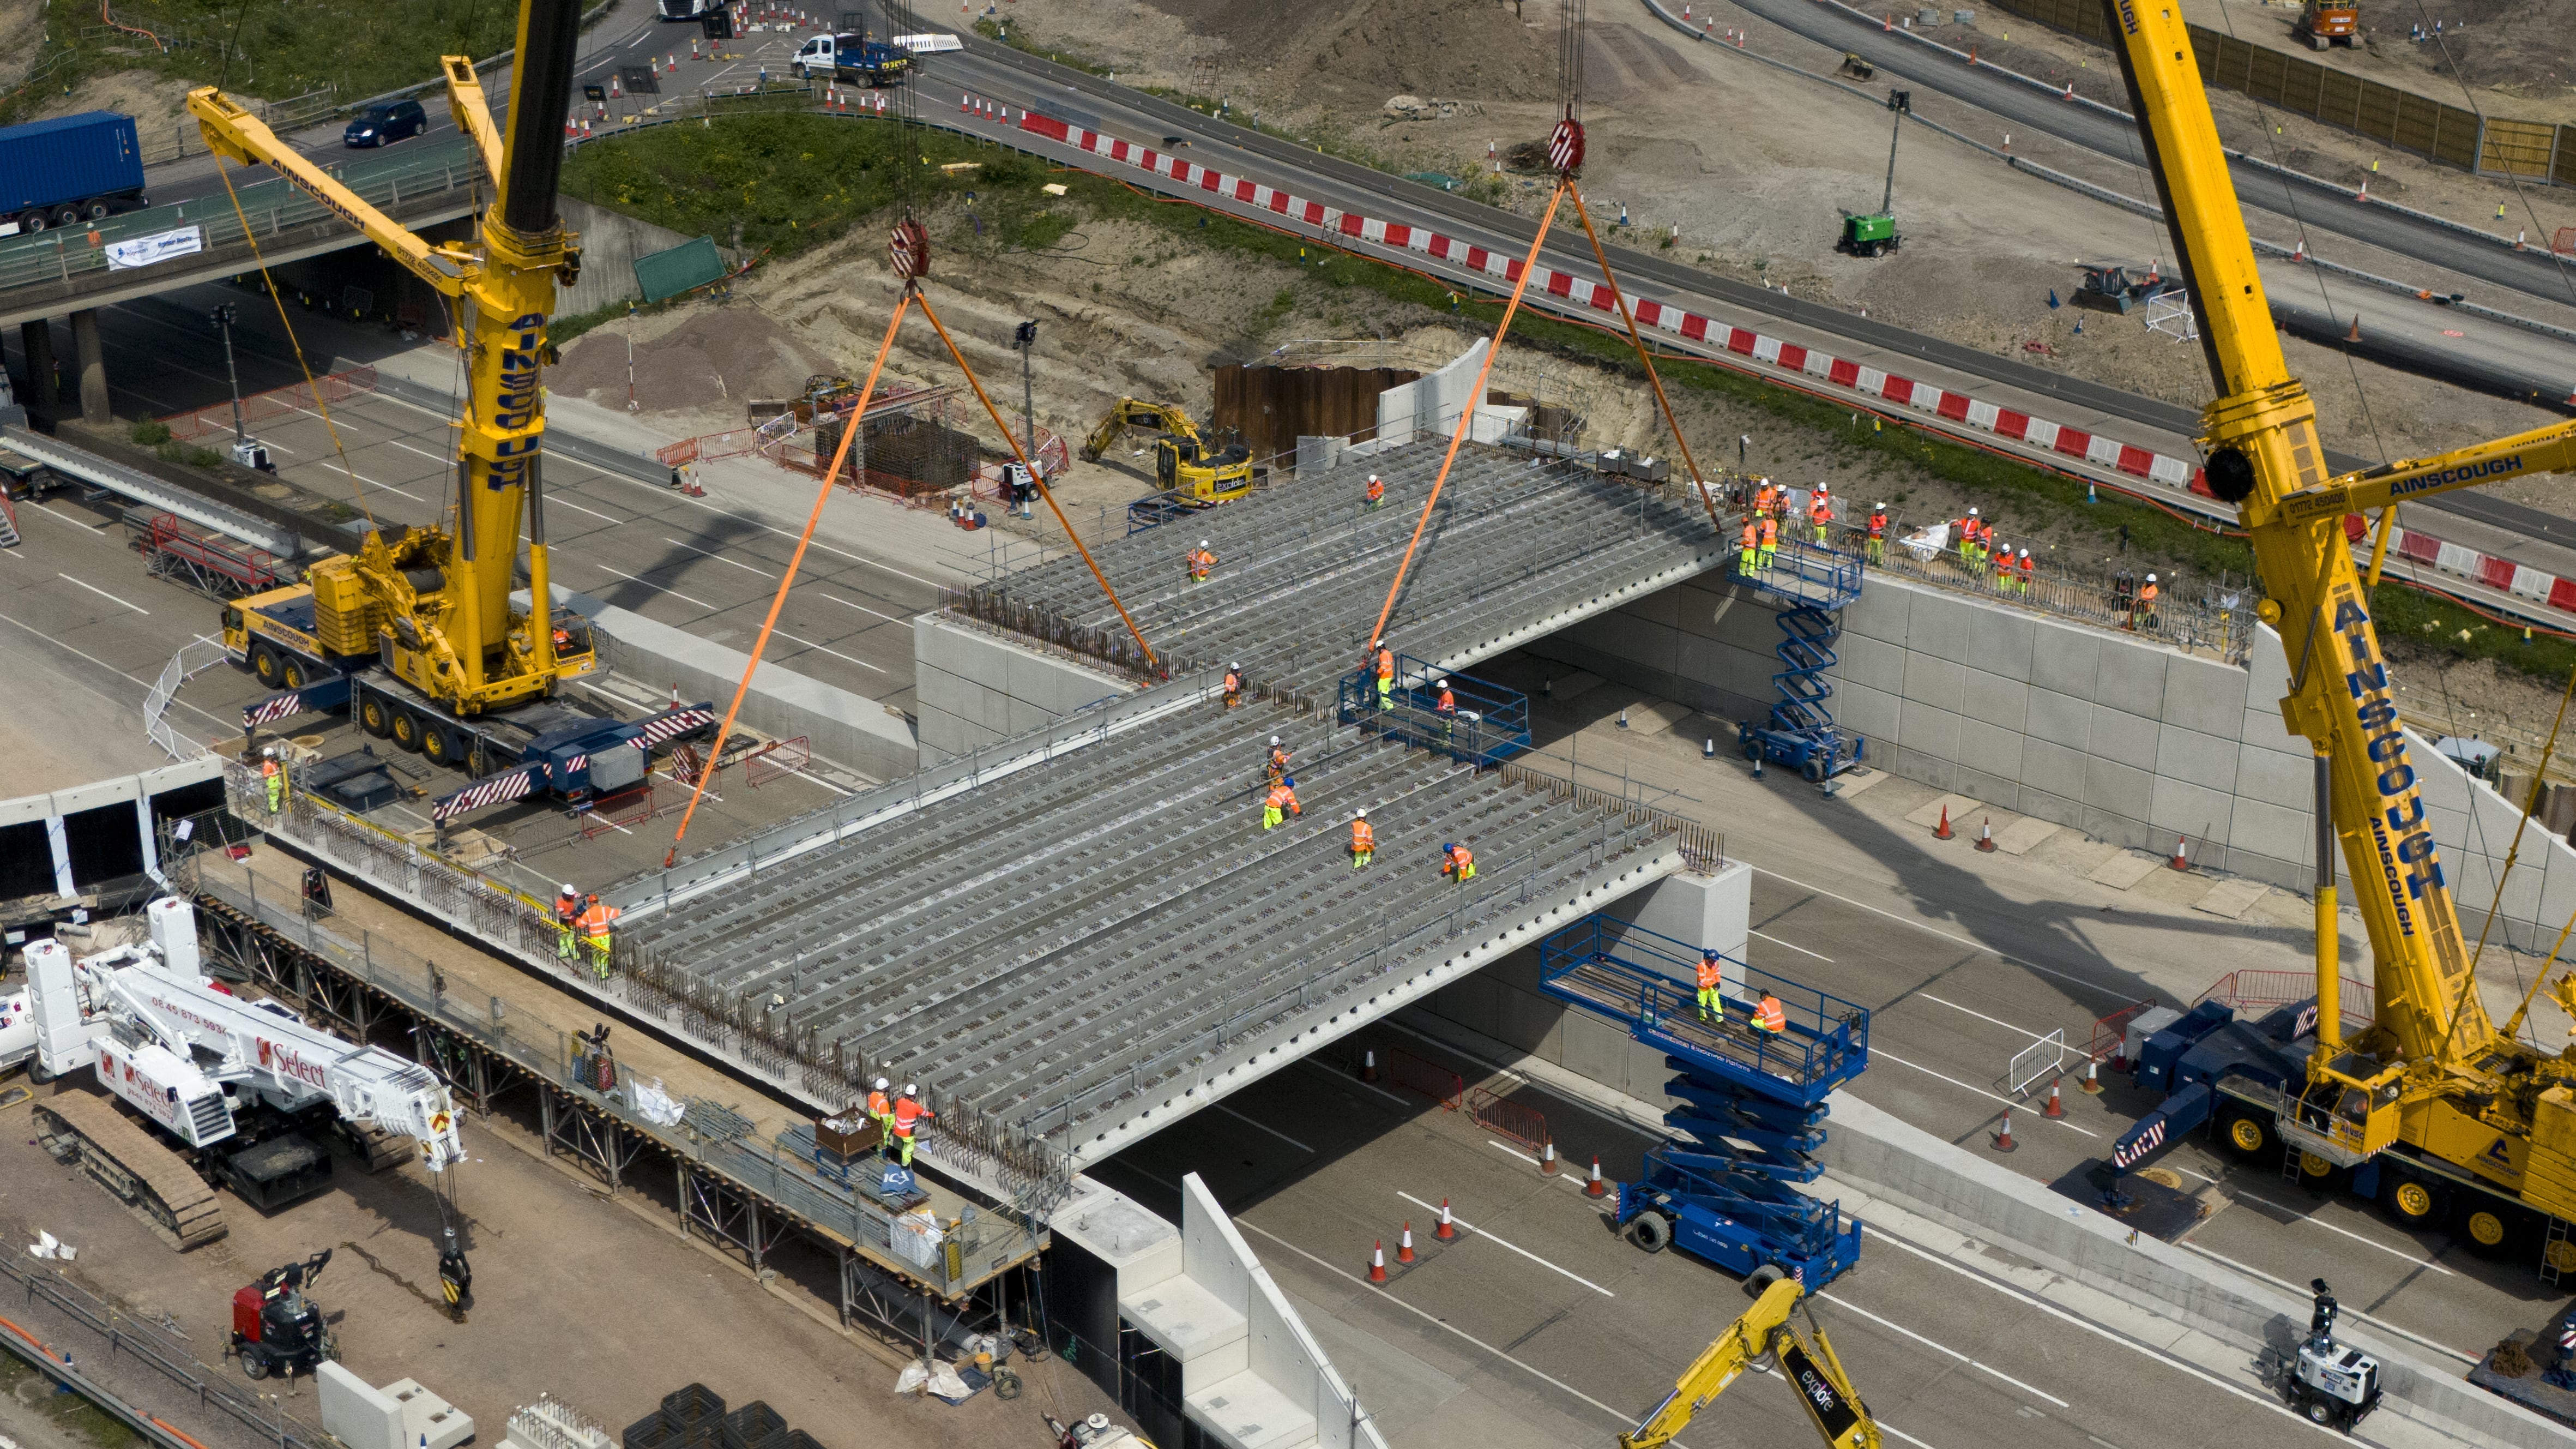 Engineering works taking place at the A3 Wisley interchange at Junction 10 of the M25